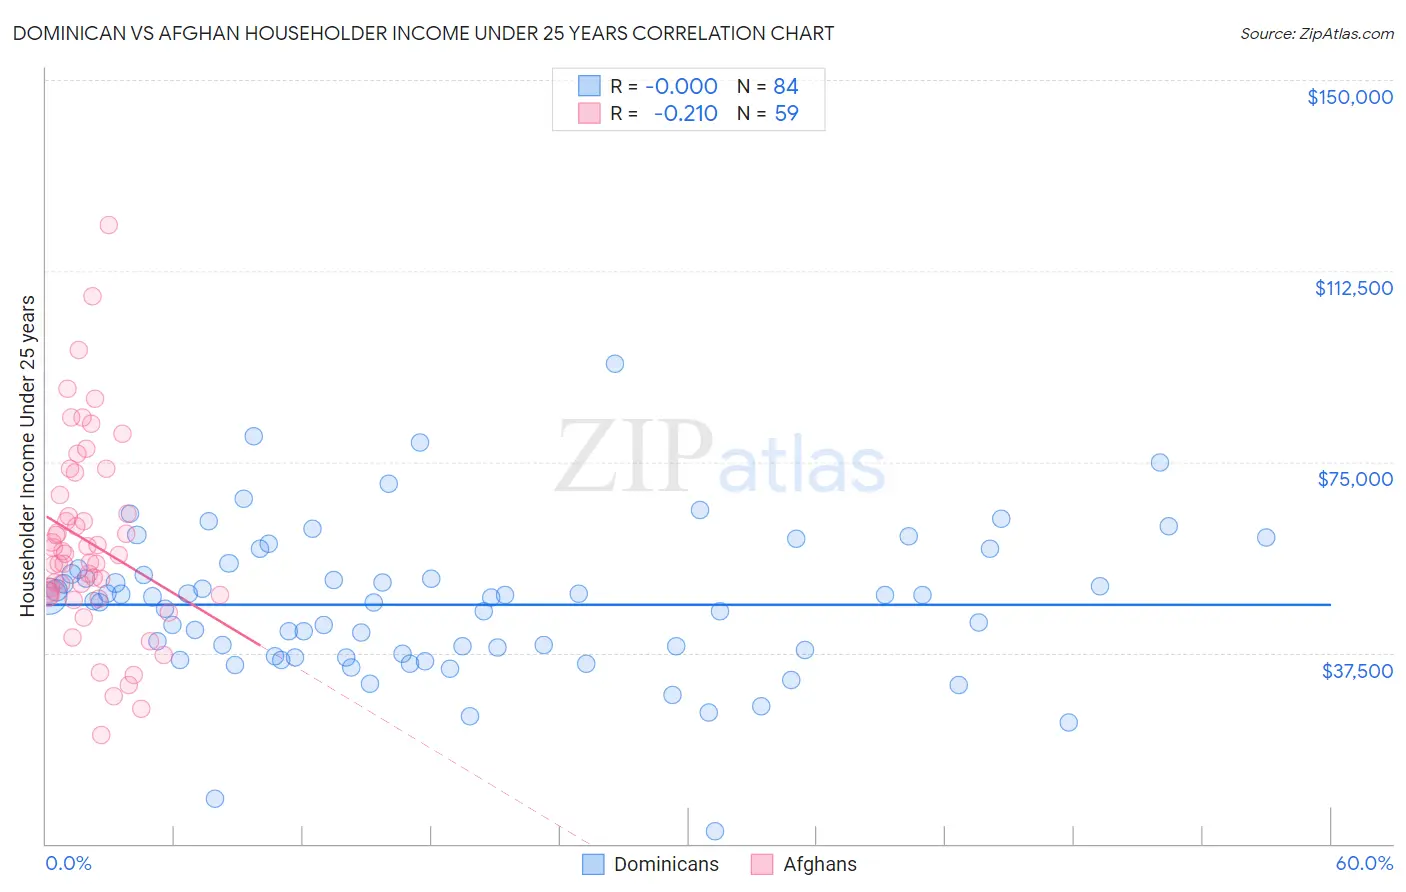 Dominican vs Afghan Householder Income Under 25 years